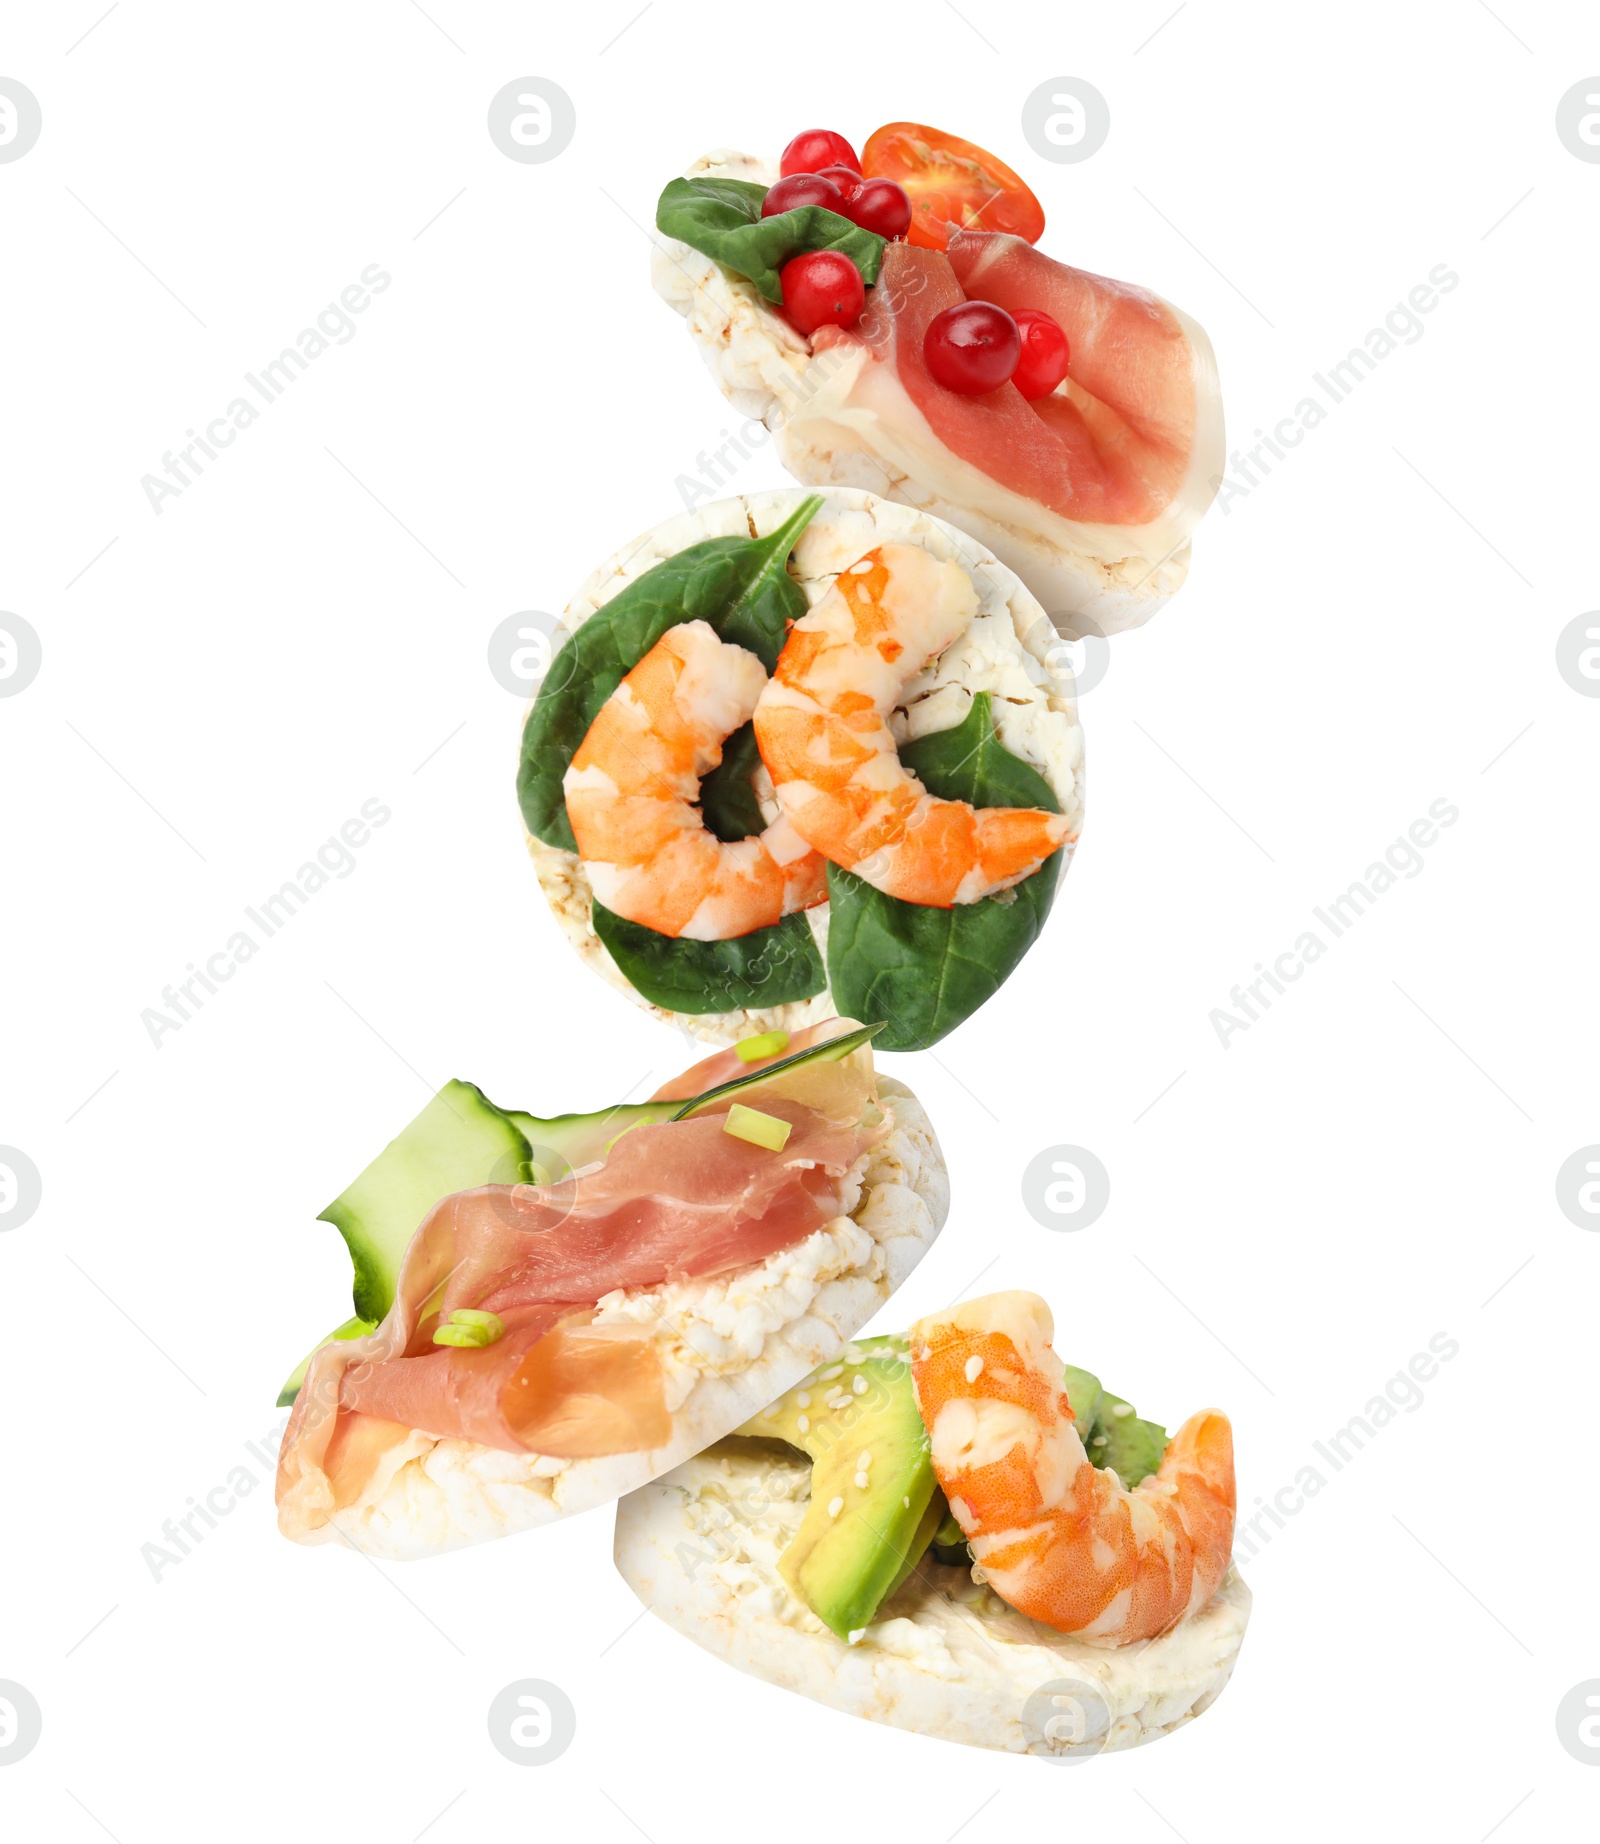 Image of Puffed corn cakes with different toppings falling on white background